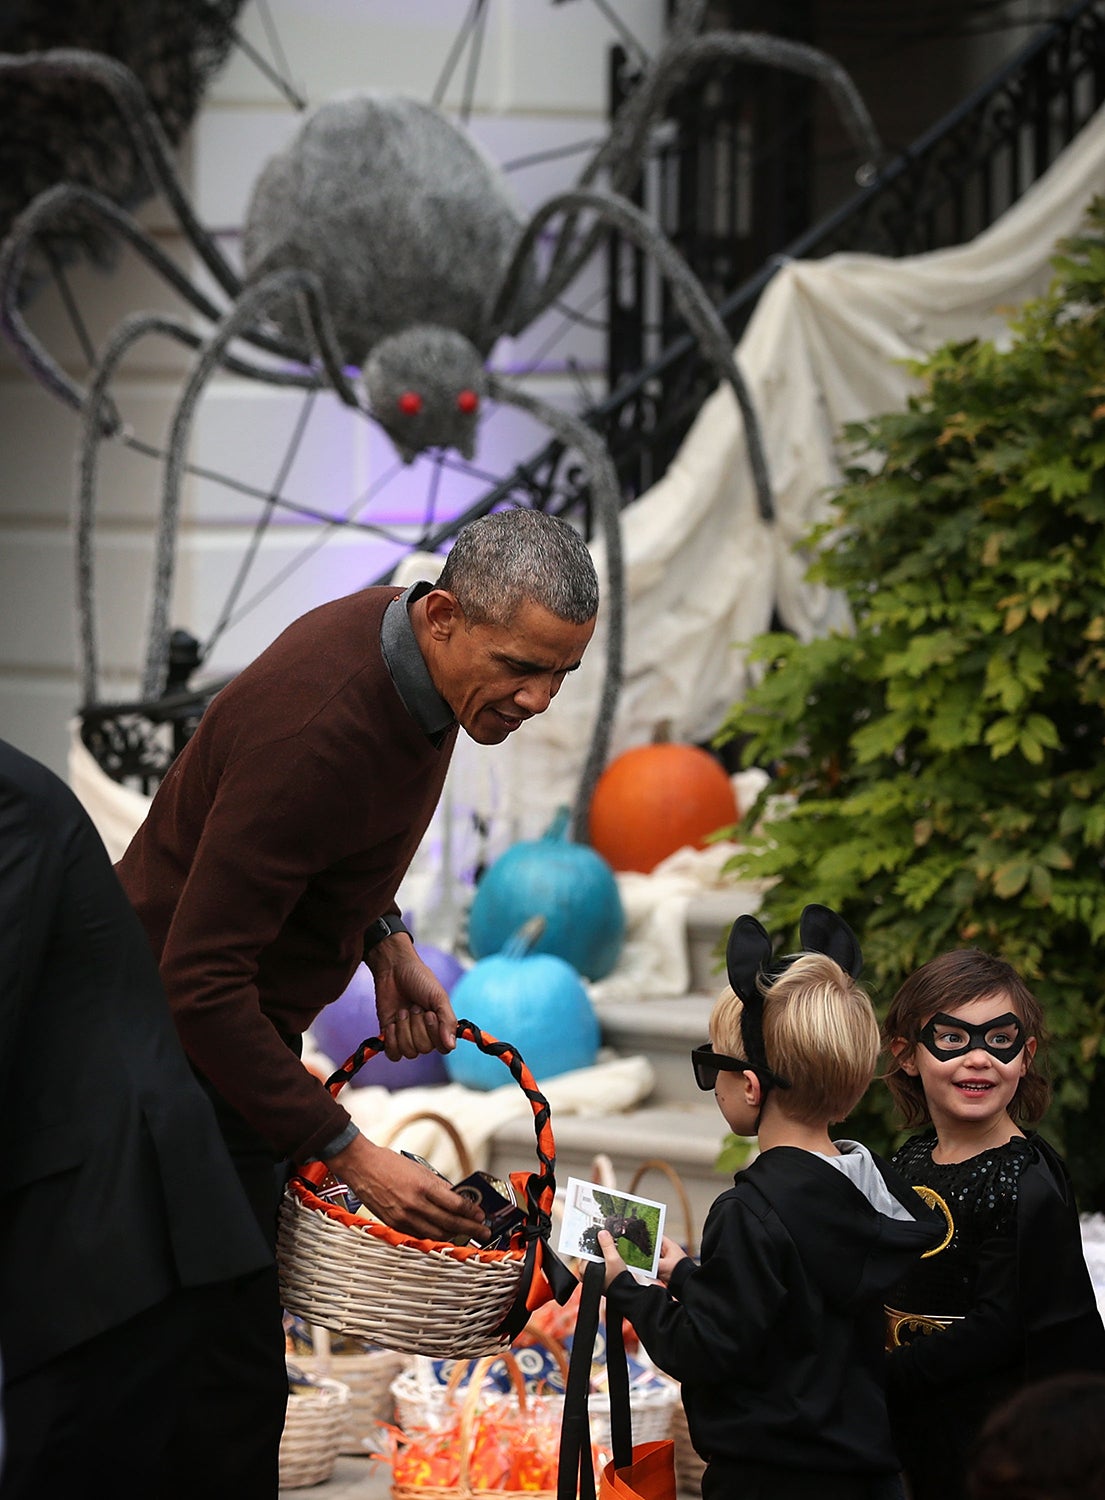 How Barack and Michelle Obama Celebrated Halloween
